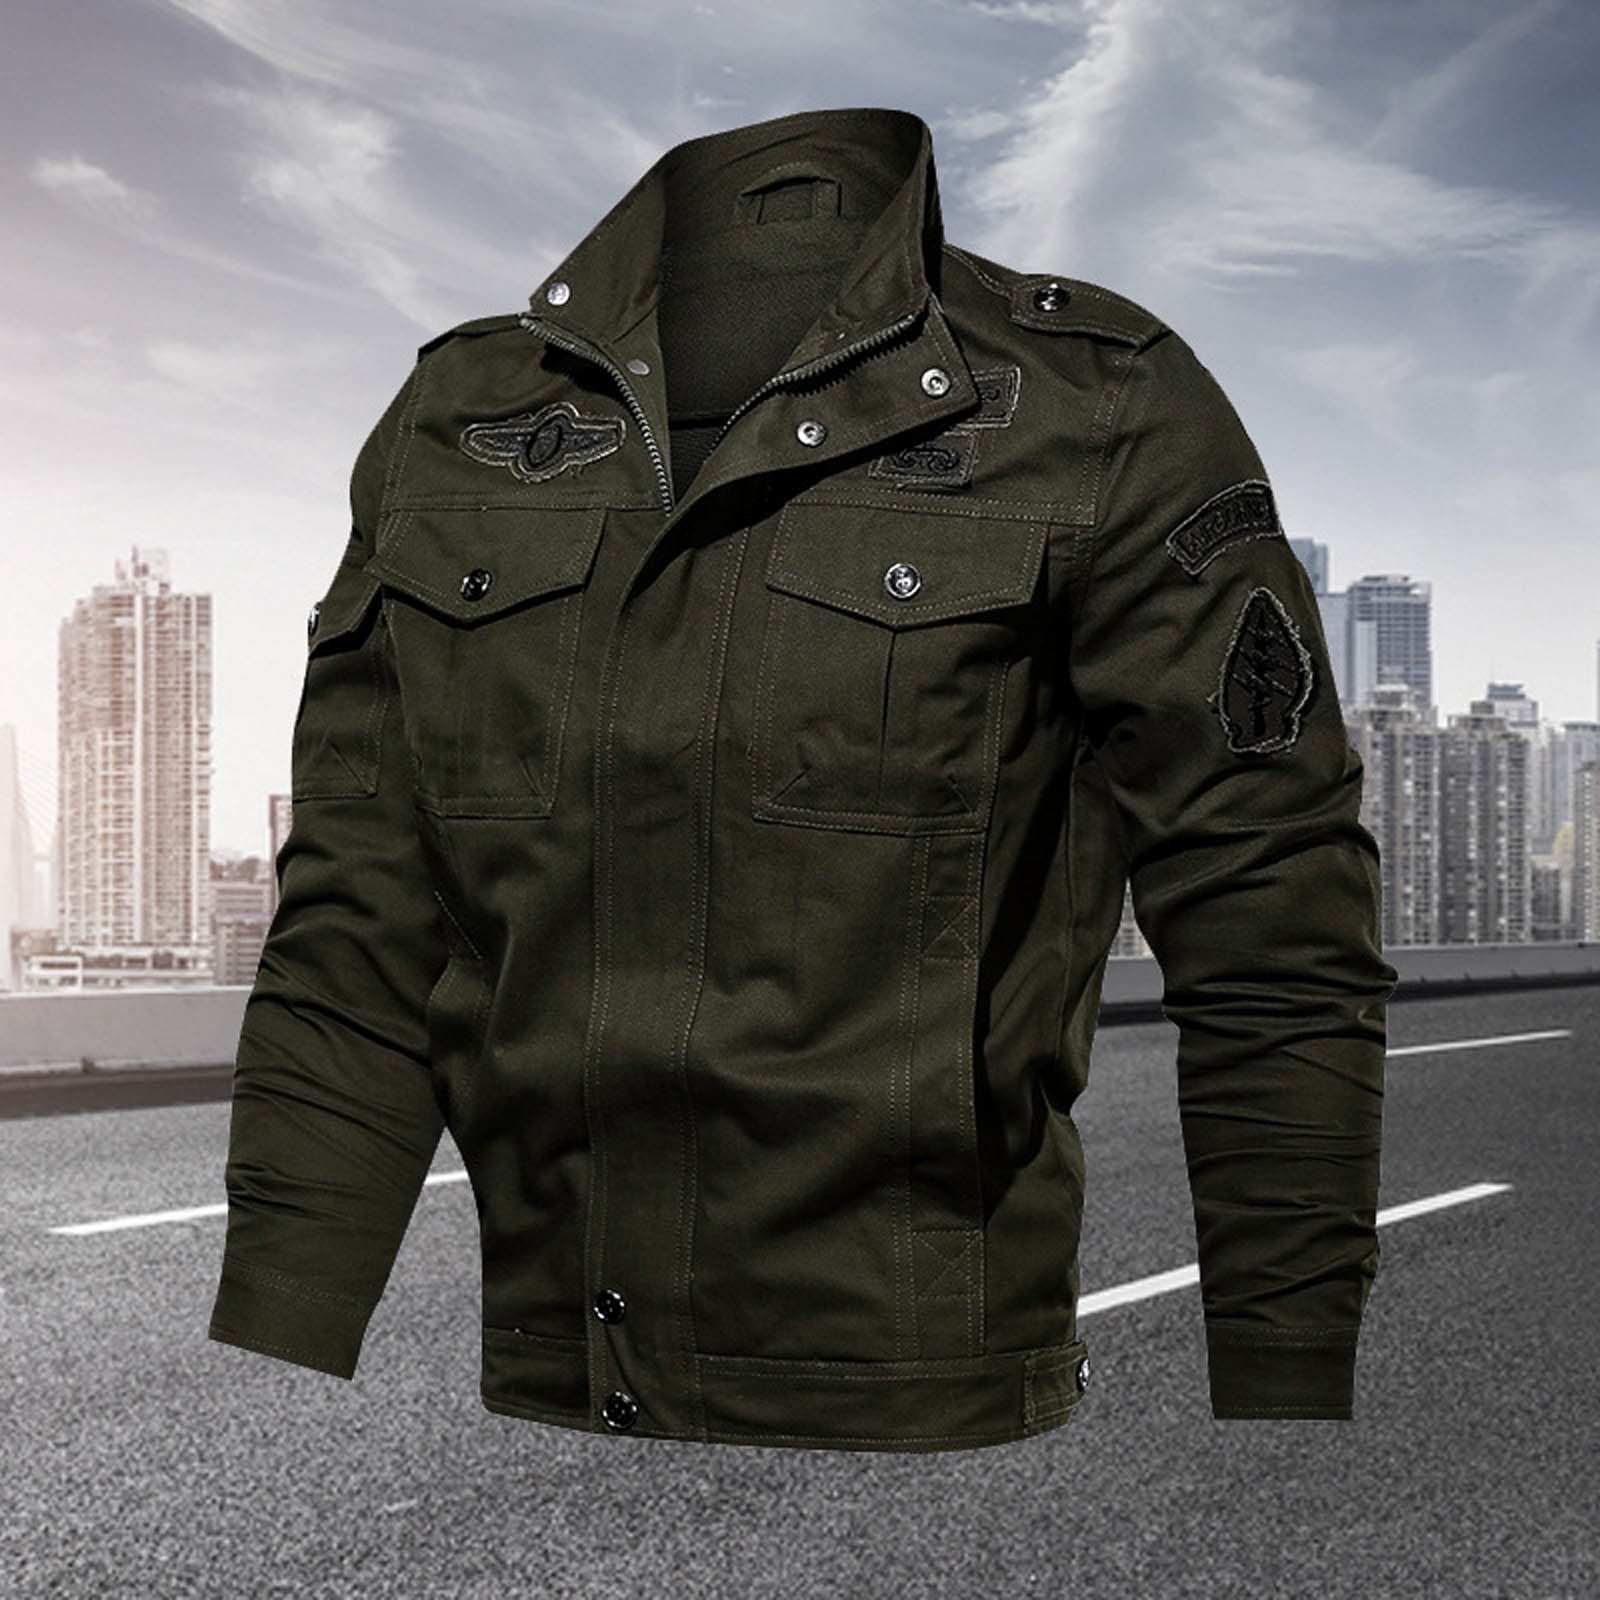 ZCFZJW Men Military Jacket Casual Cotton Utility Coat Spring Falls Durable  Army Cargo Bomber Full Zip Up Stand Collar Multi-Pocket Outwear & Jackets  Army Green XL 